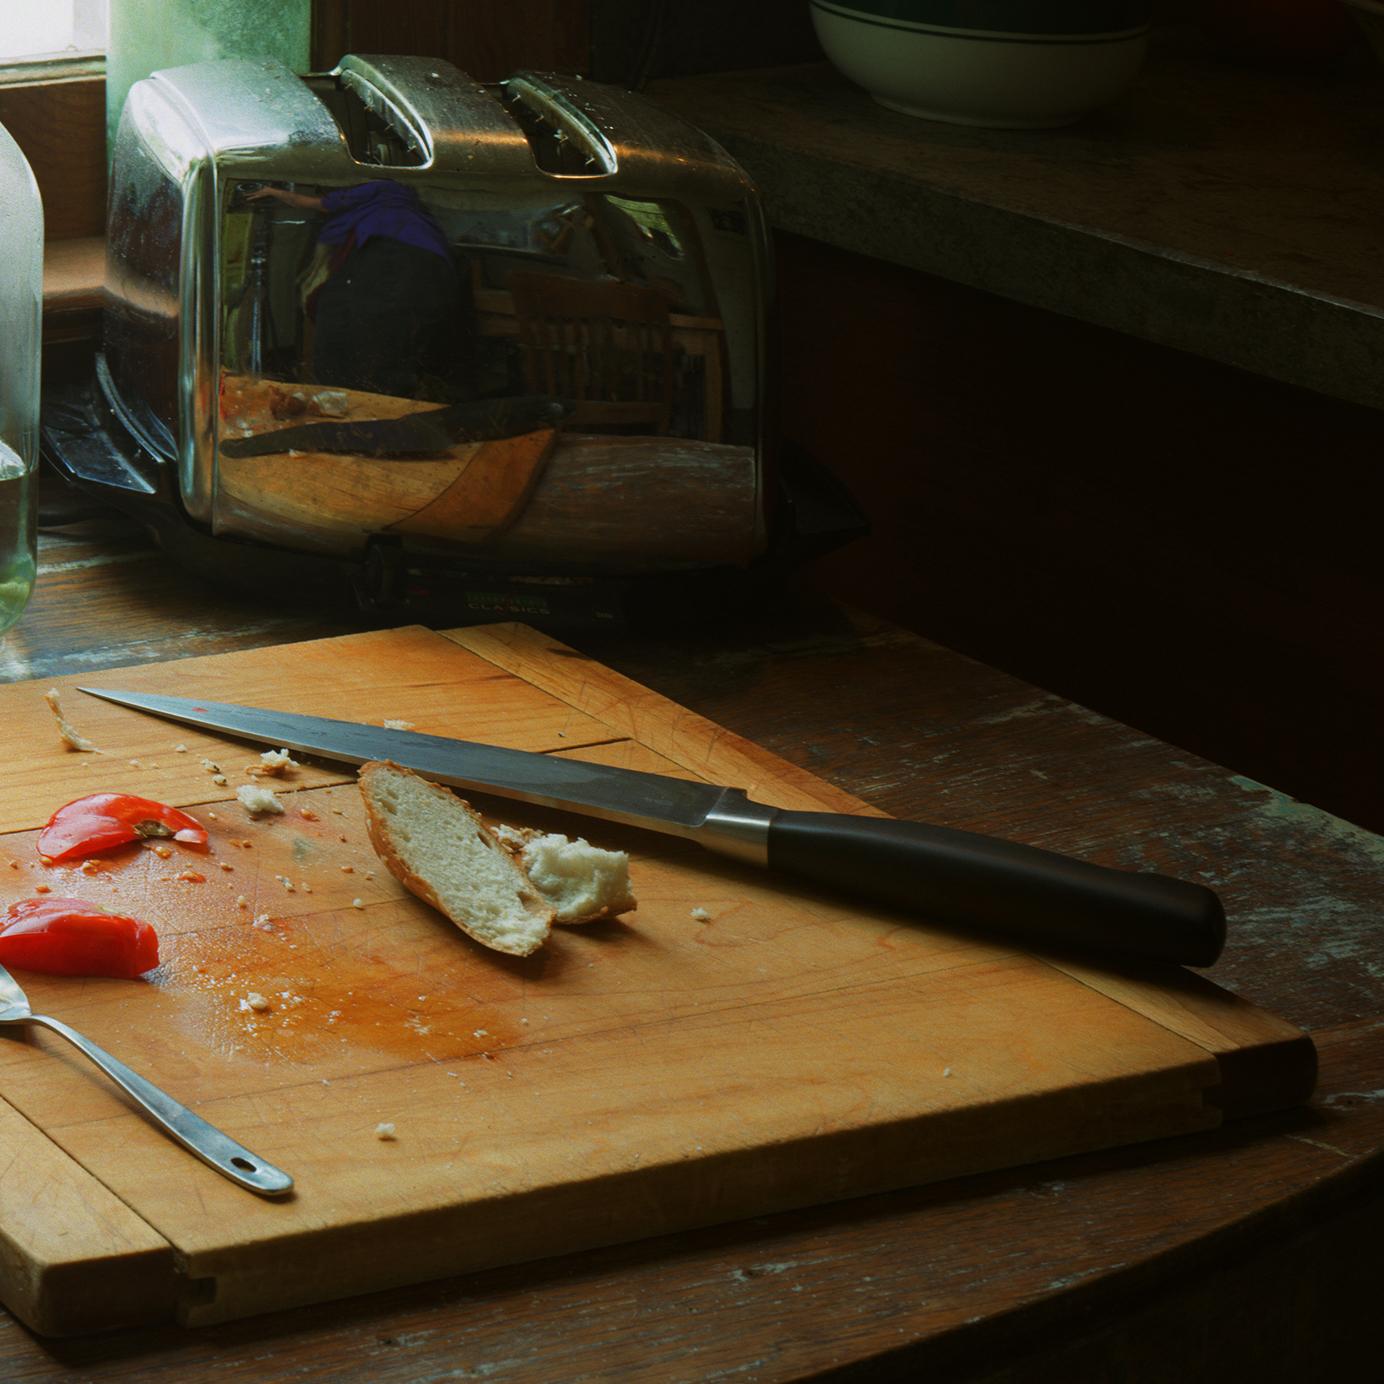 Edition of 5.
30 x 40 inches (image); 30.75 x 40.75 inches (framed)

'Still Life #1, San Francisco, California' is an intimate still life featuring everyday objects and ingredients common to kitchens across America. The soft light streaming in from